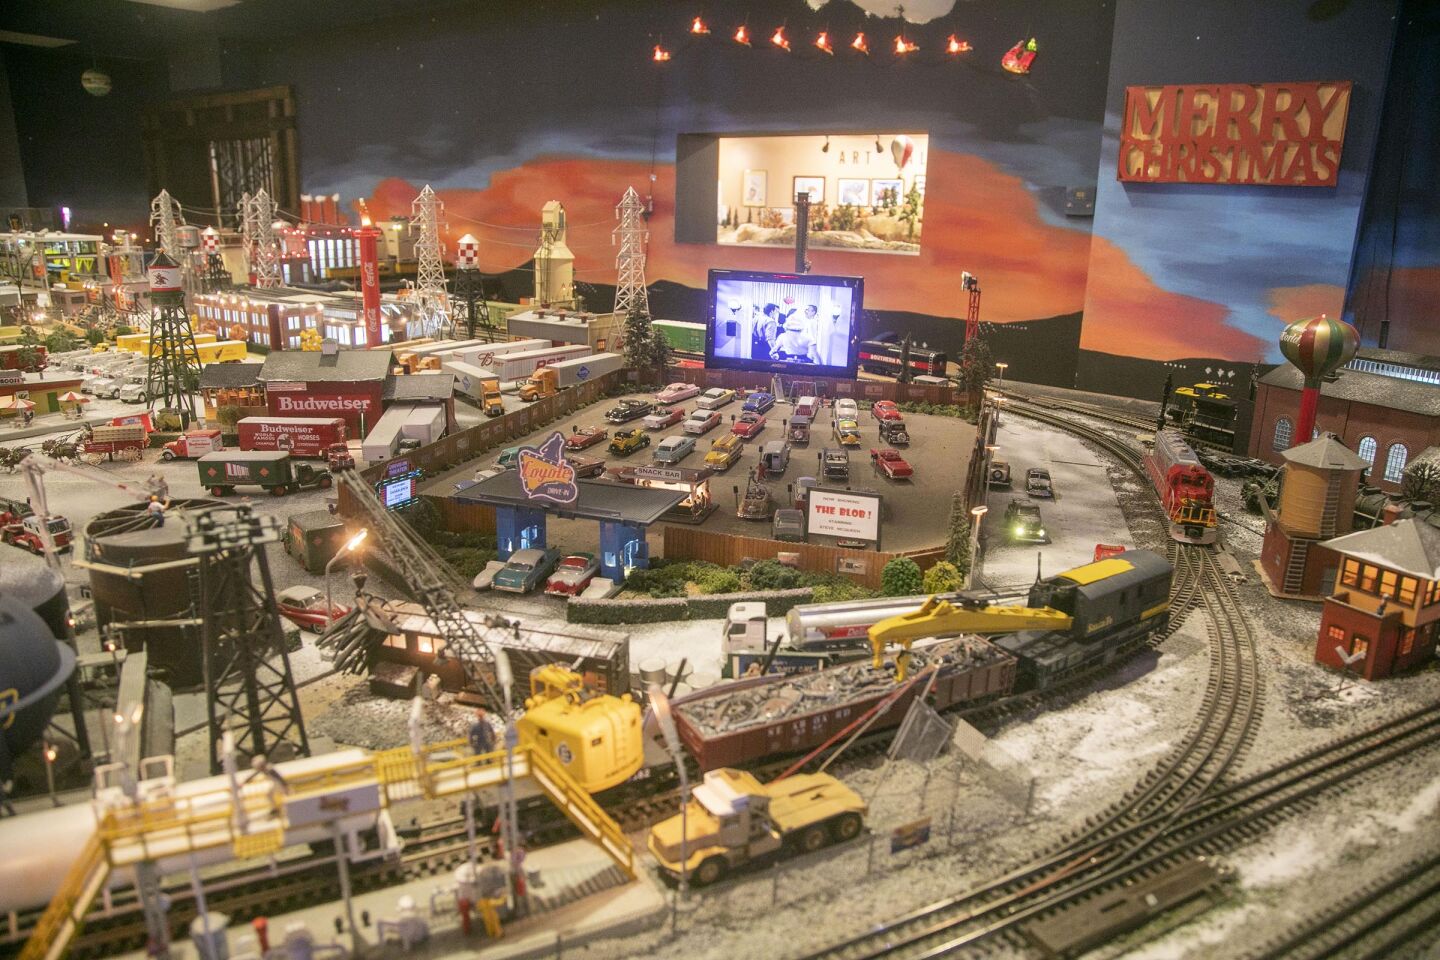 David Lizerbram and his wife Mana Monzavi took over the Old Town Model Railroad Depot, which was in danger of closing. The extensive train layout and its detailed and sometimes humorous dioramas was photographed on Friday, Dec. 13, 2019, at its Old Town, San Diego location. A good, old-fashioned drive in showing "The Blob."